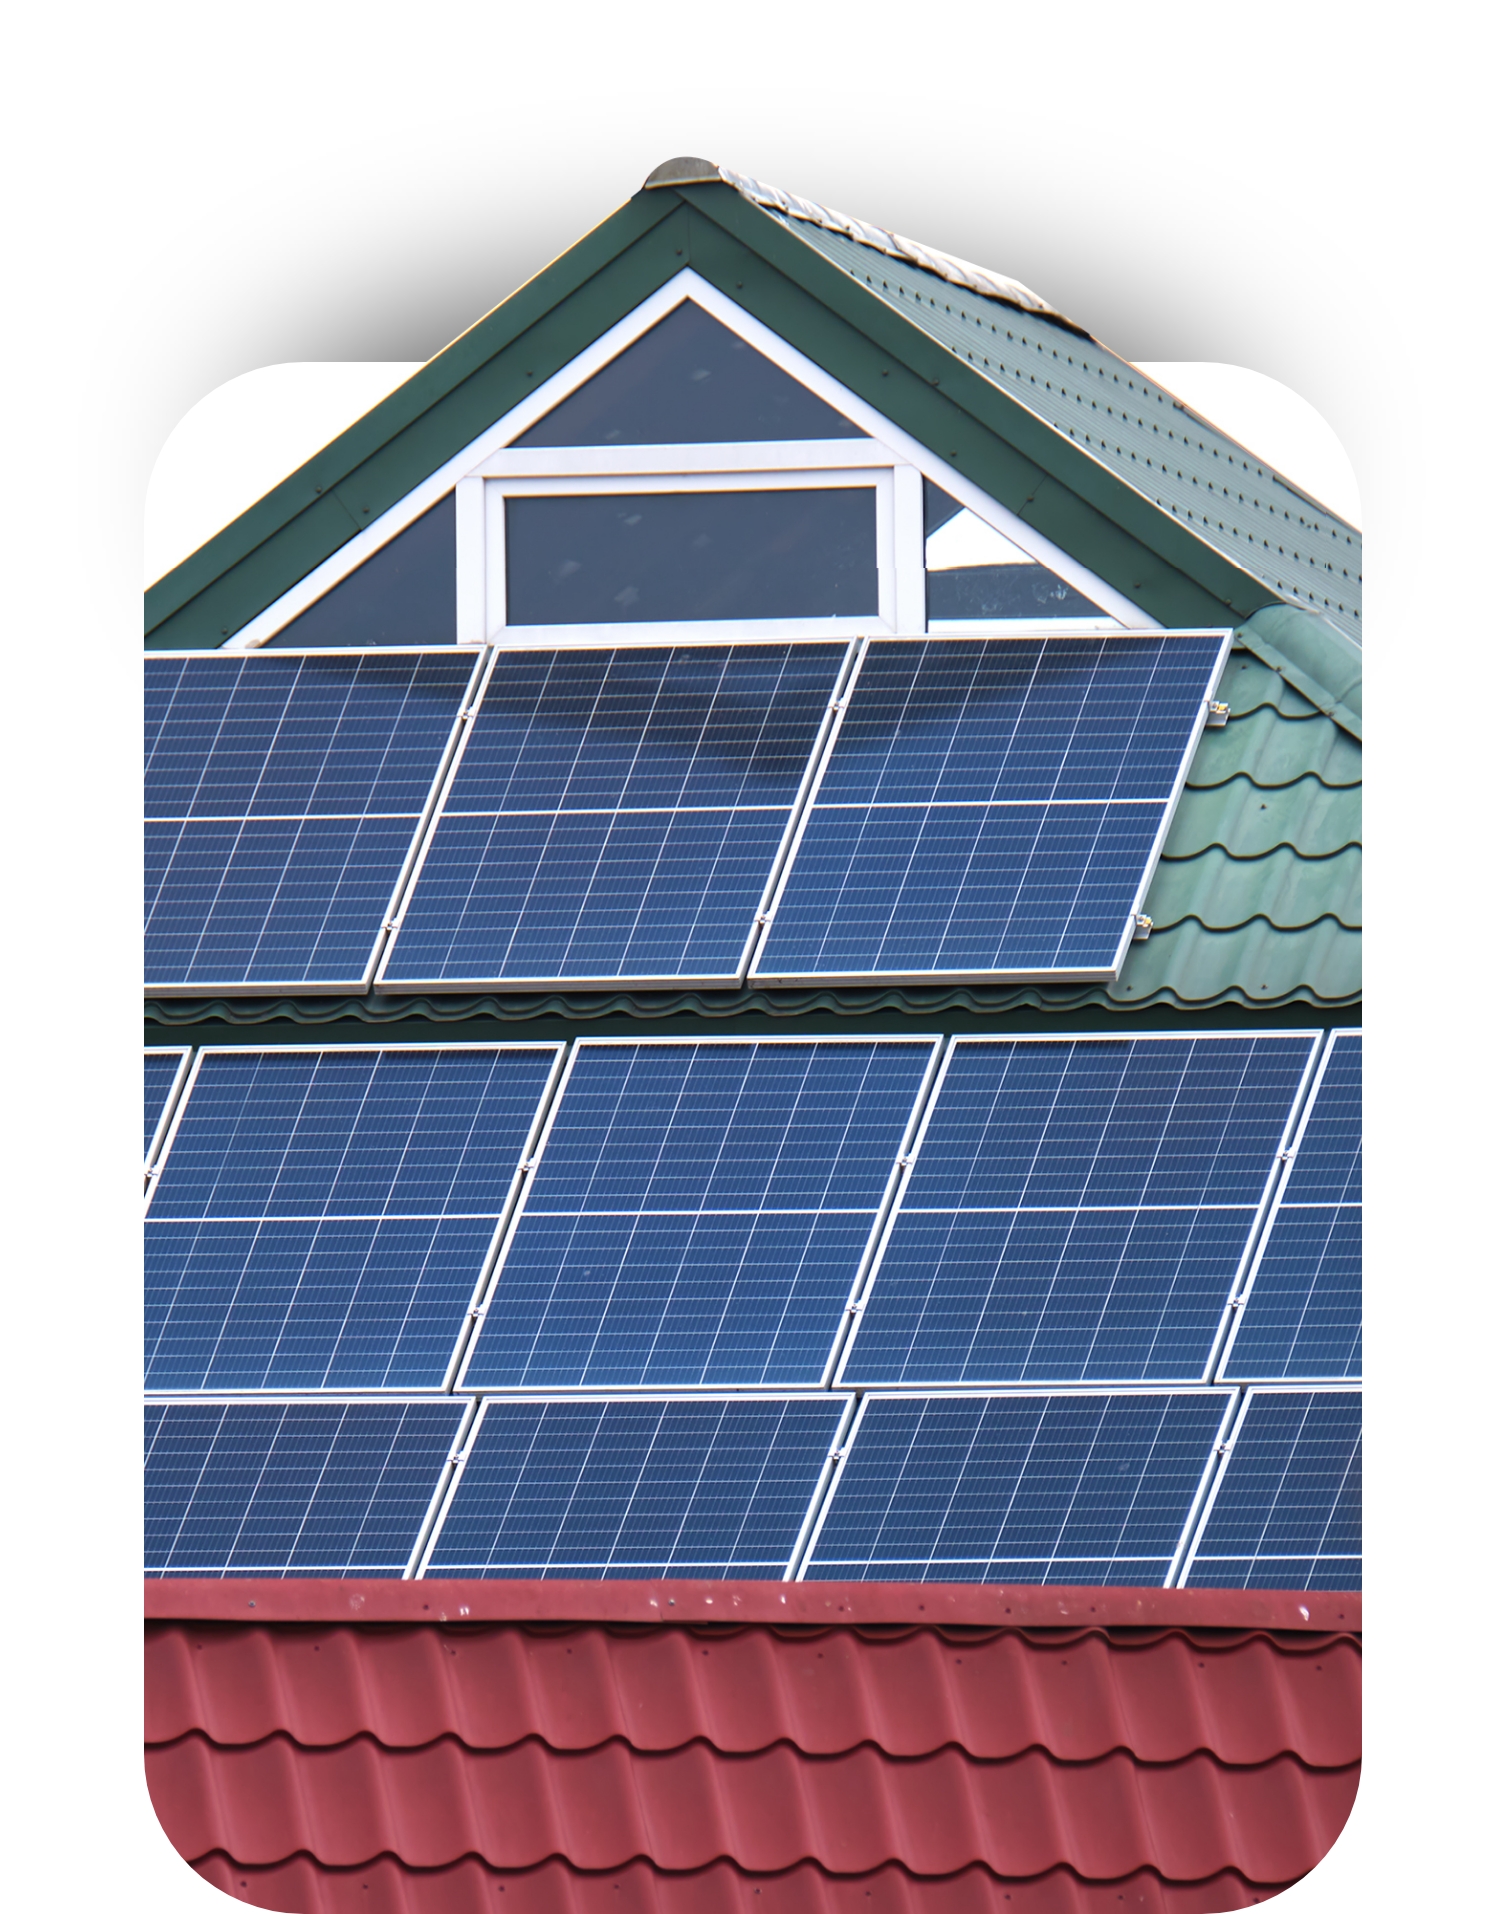 Locally-owned Solar by Peak to Peak is the premier solar panel installer of Colorado's solar companies, including Golden Solar and Photon Brothers. Check out our reviews so you can make an informed decision regarding your own energy solar system.